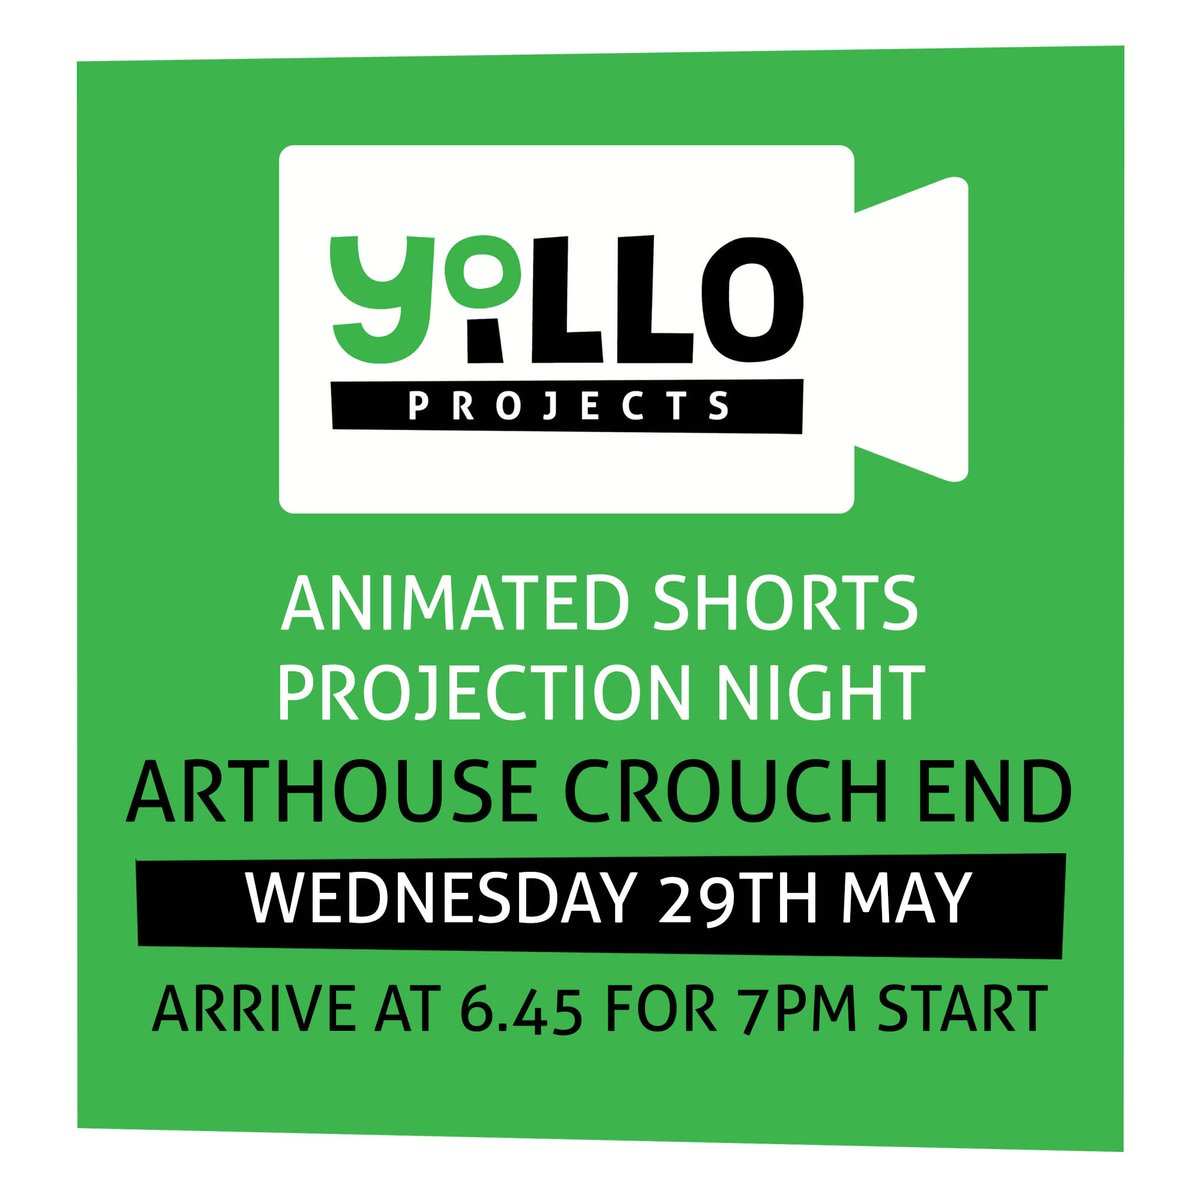 📽️ @yoillo are organising a special screening of Animated Shorts this 29th May at ArtHouse Crouch End in London. All illustrators invited! Find more information: theaoi.com/event/yo-illo-…